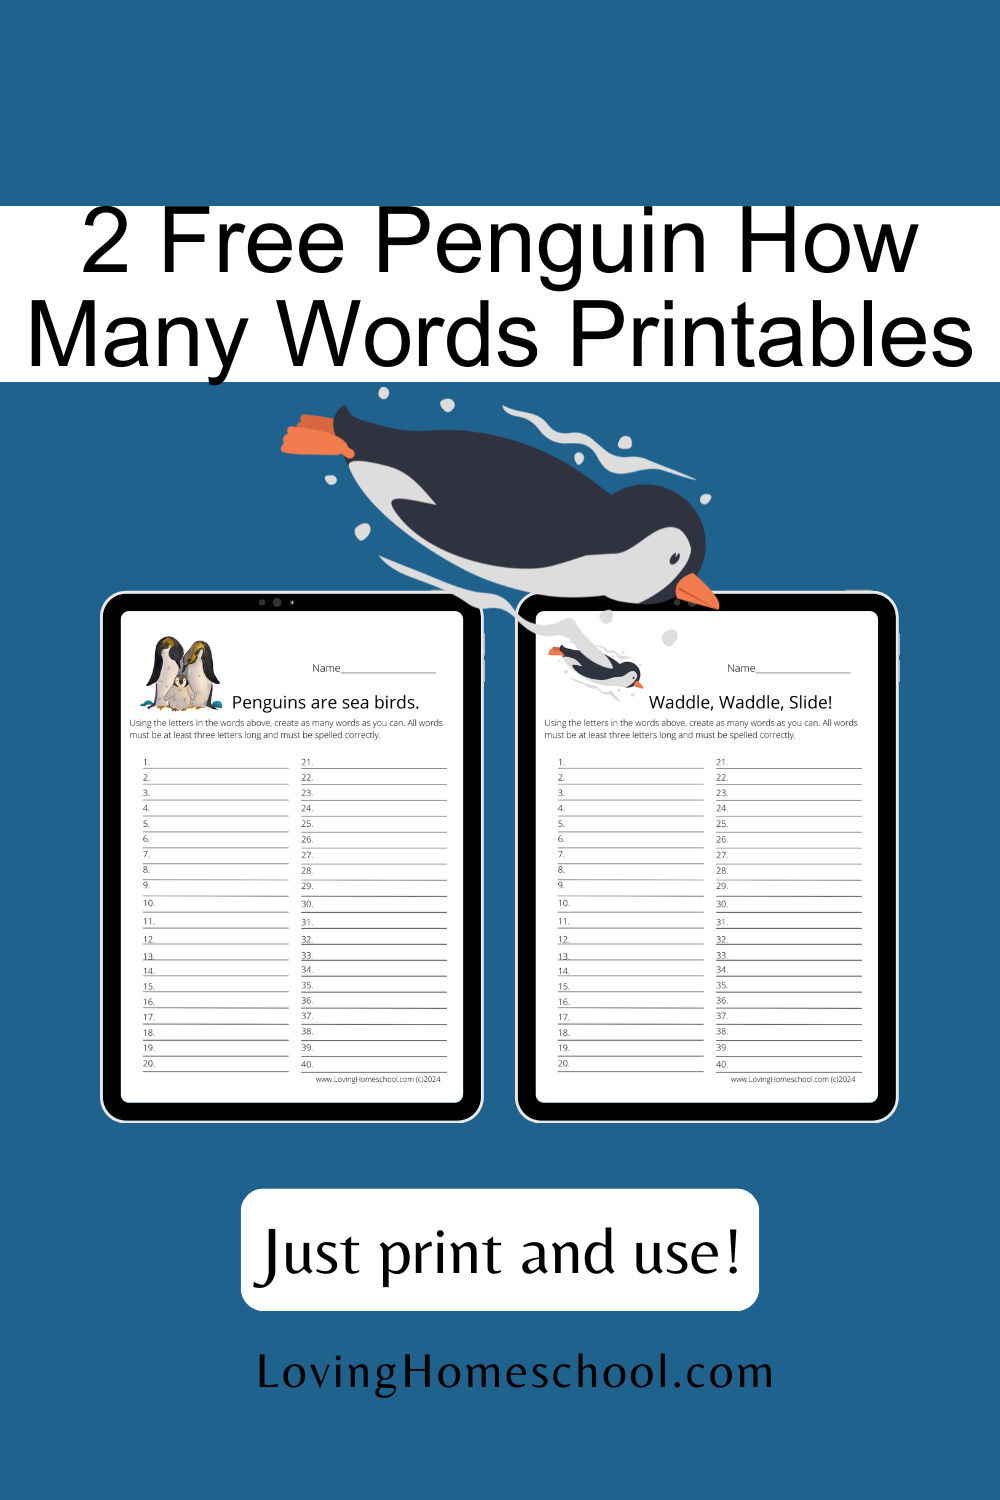 2 Free Penguin How Many Words Printables Pinterest Pin